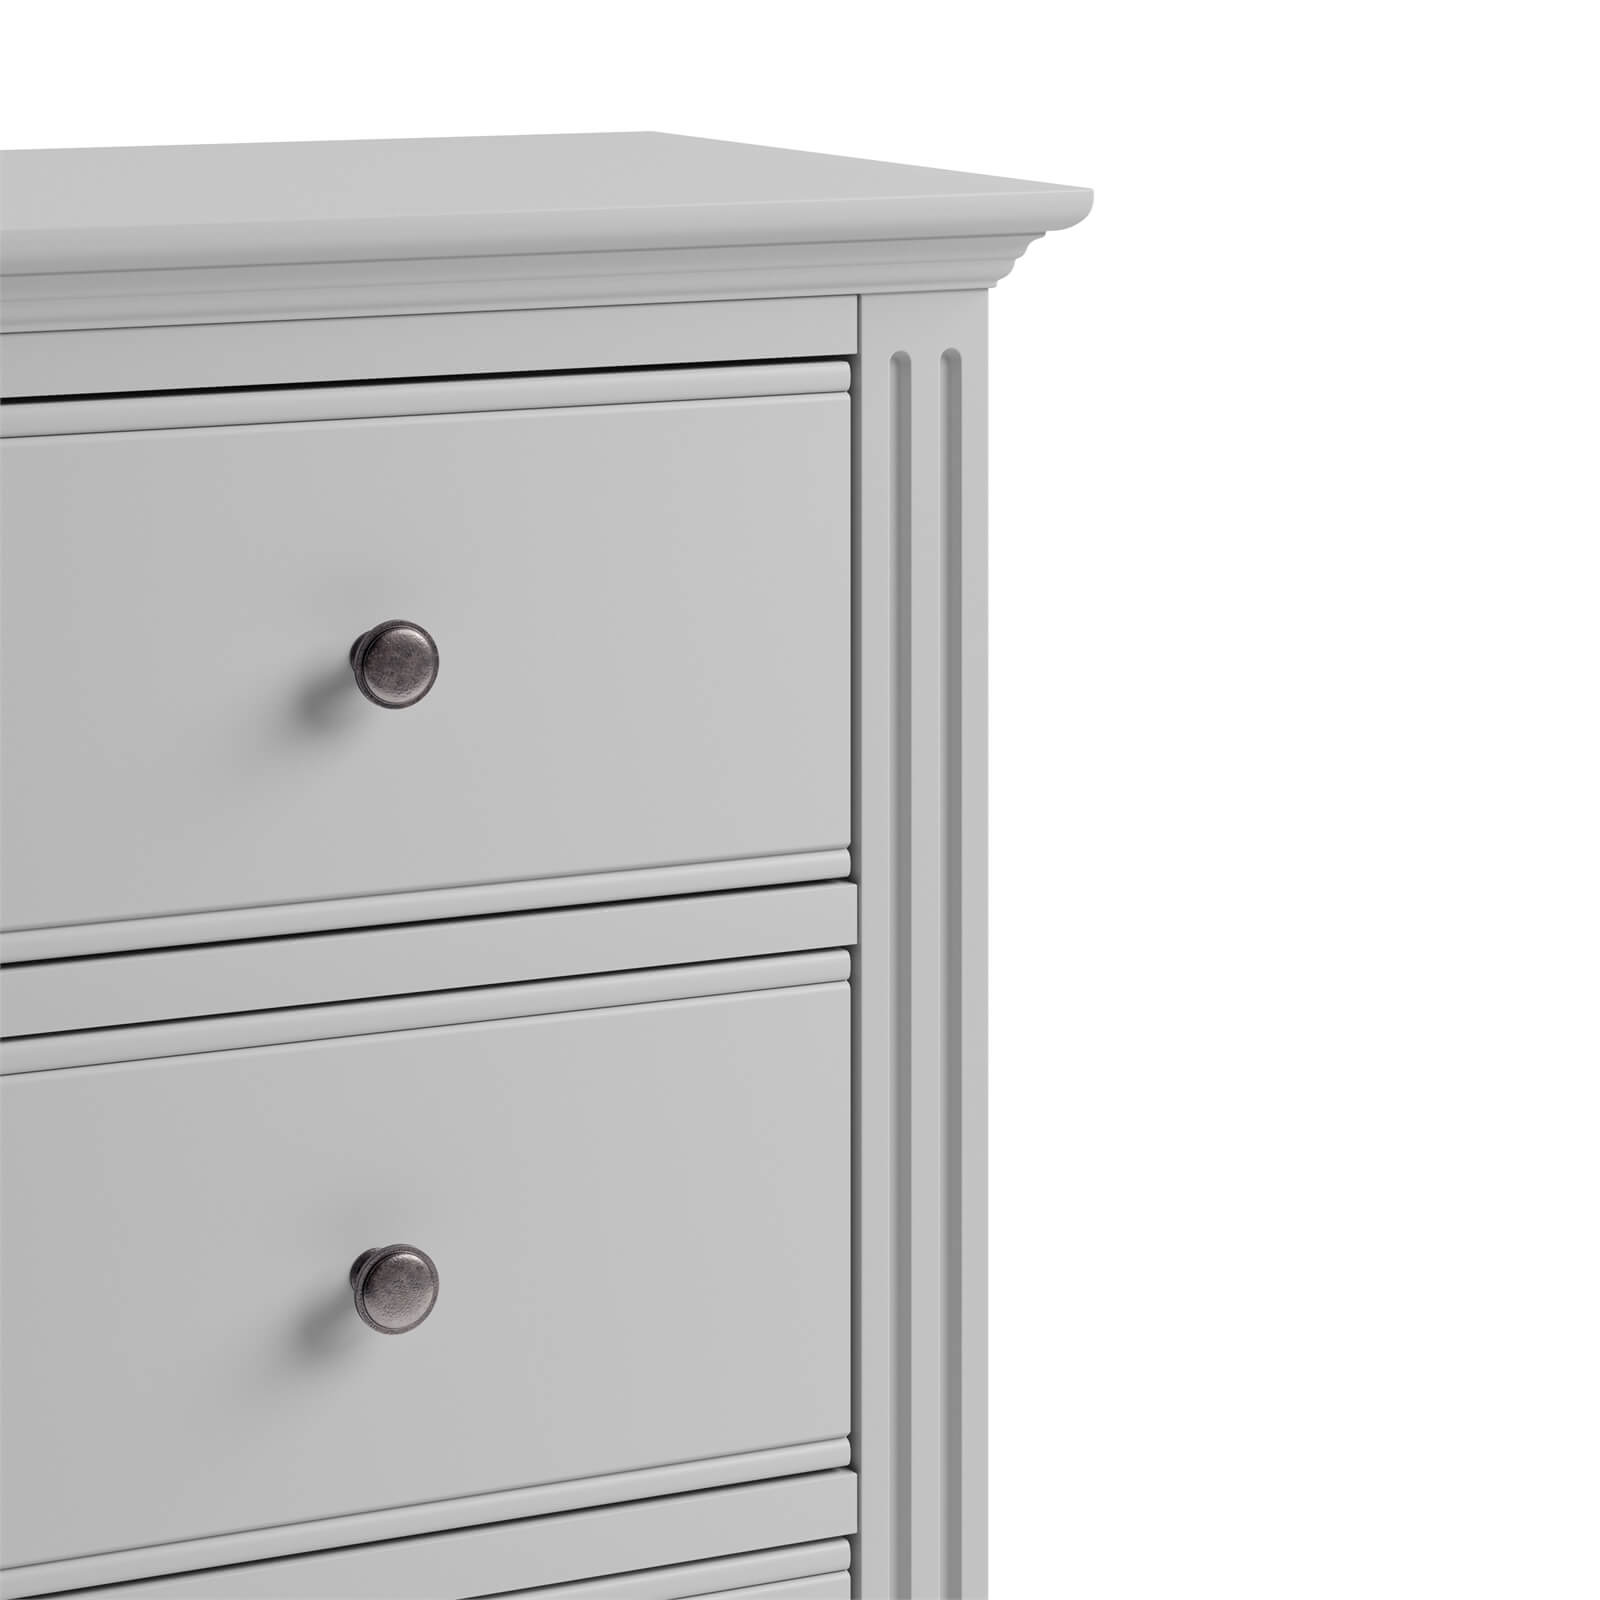 Camborne 5 Drawer Narrow Chest of Drawers - Grey